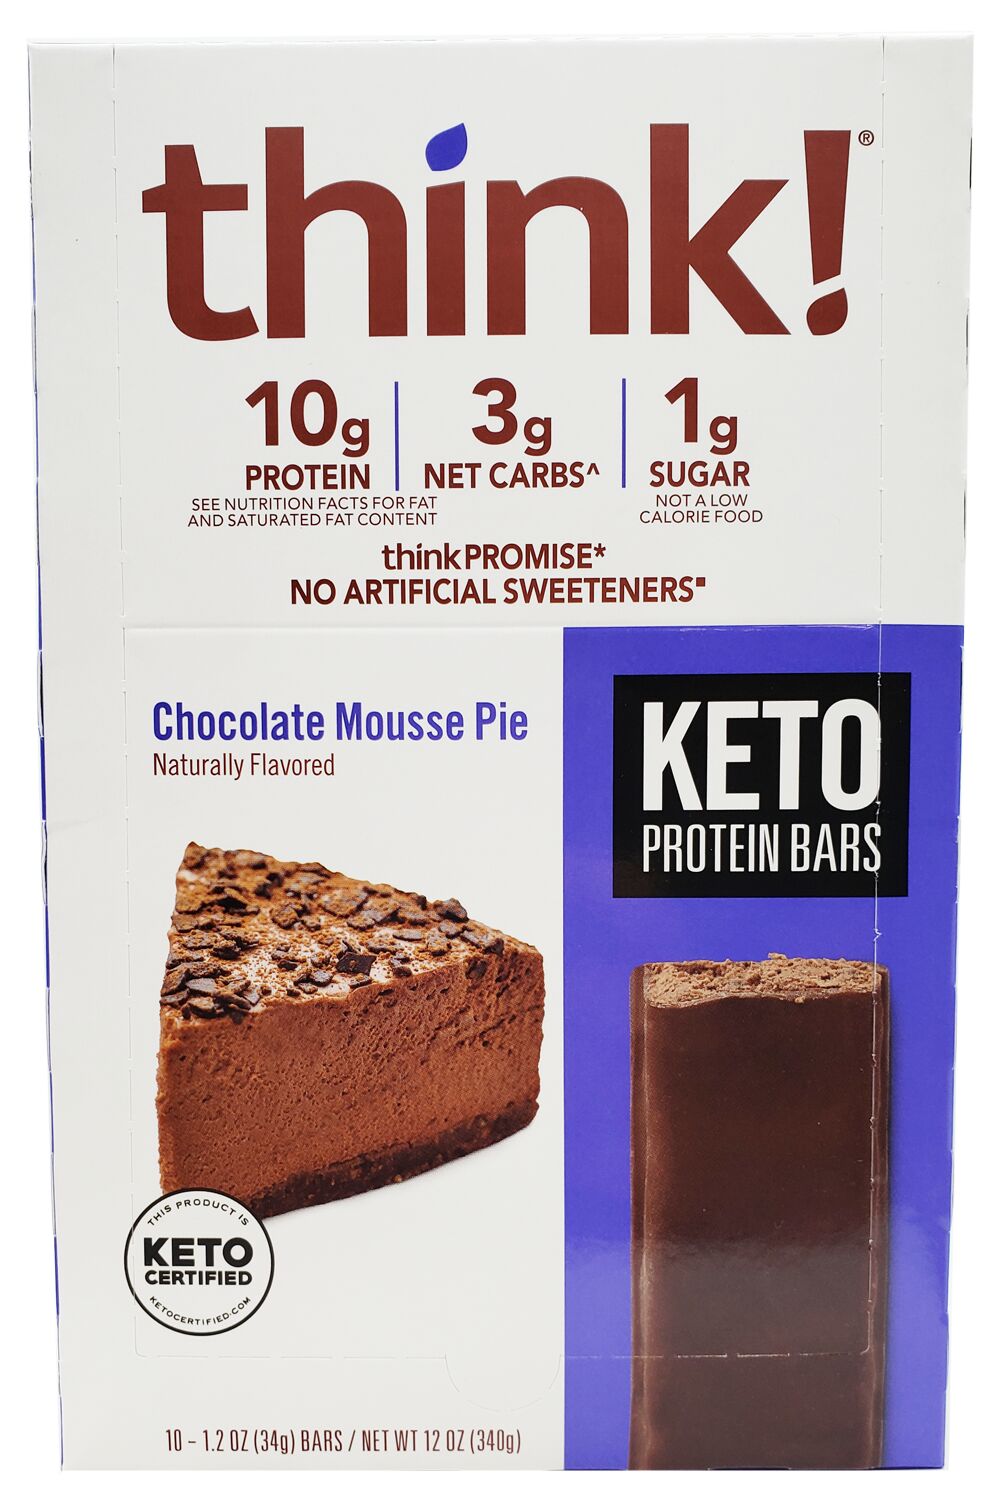 Think! Keto Protein Bars by Think! - Exclusive Offer at $27.49 on